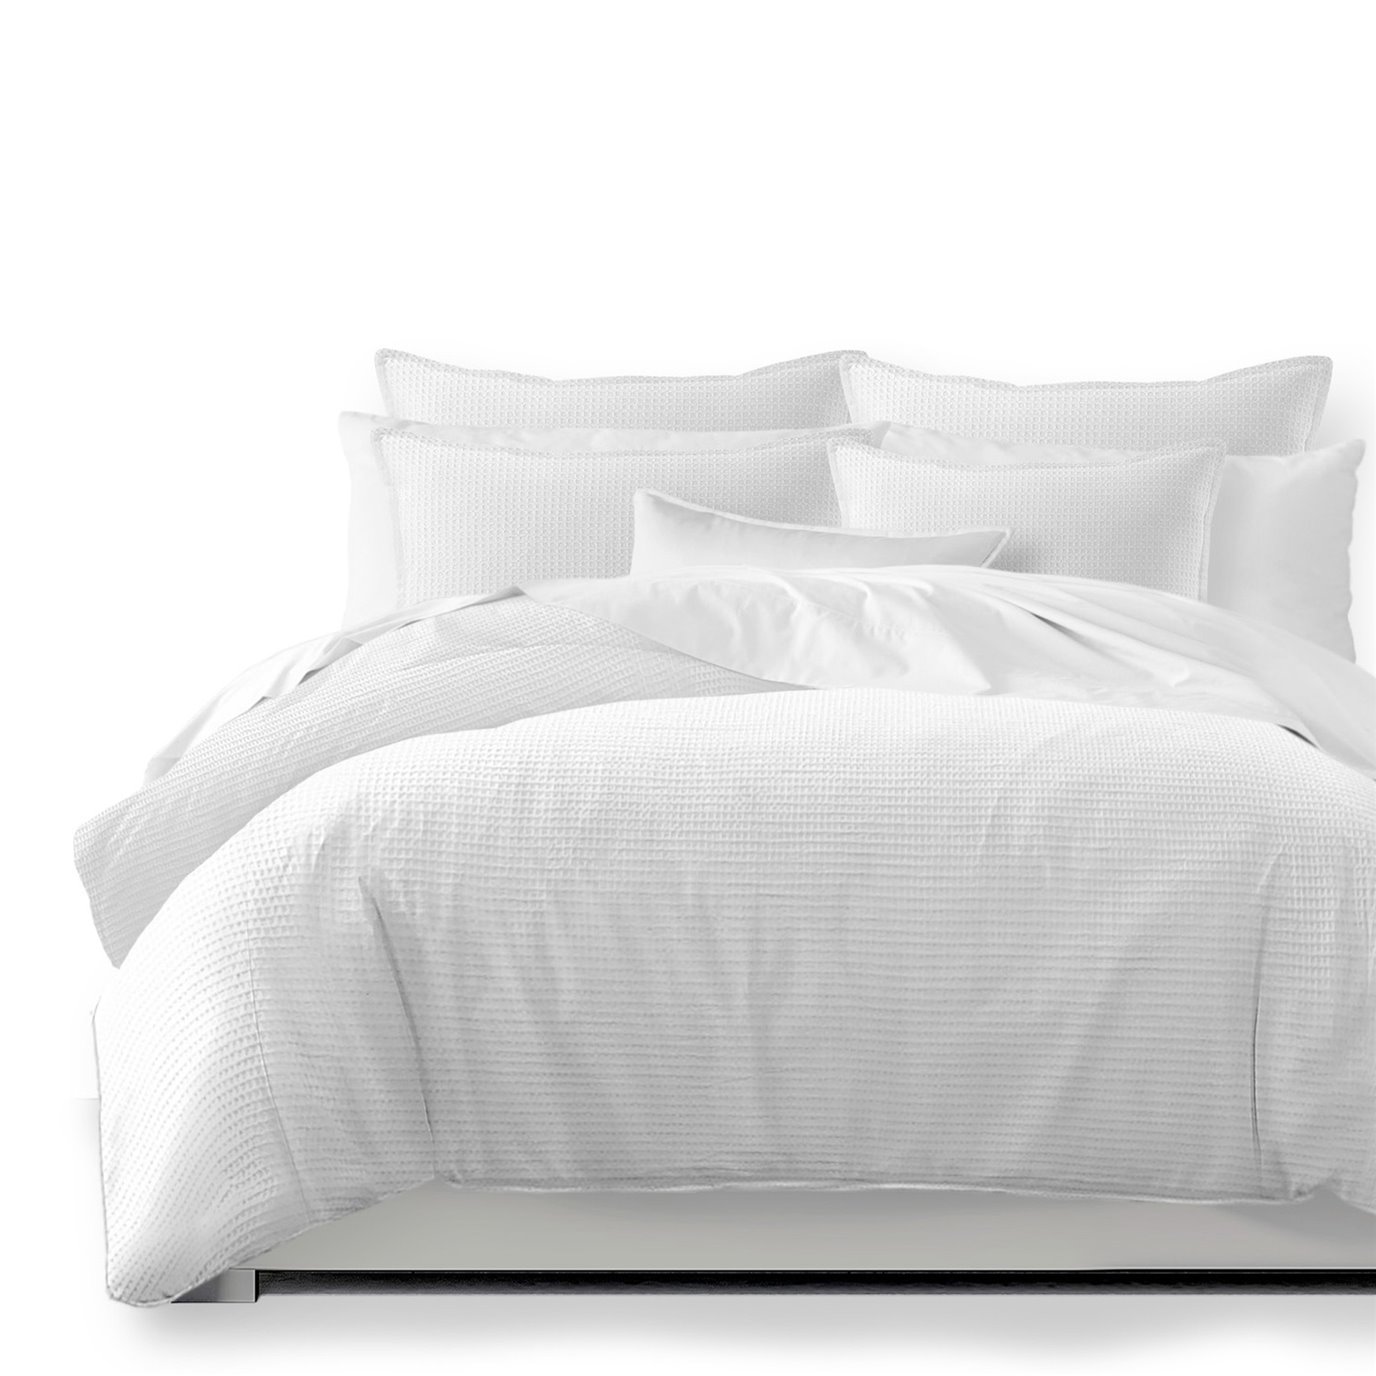 Classic Waffle White Duvet Cover and Pillow Sham(s) Set - Size Twin